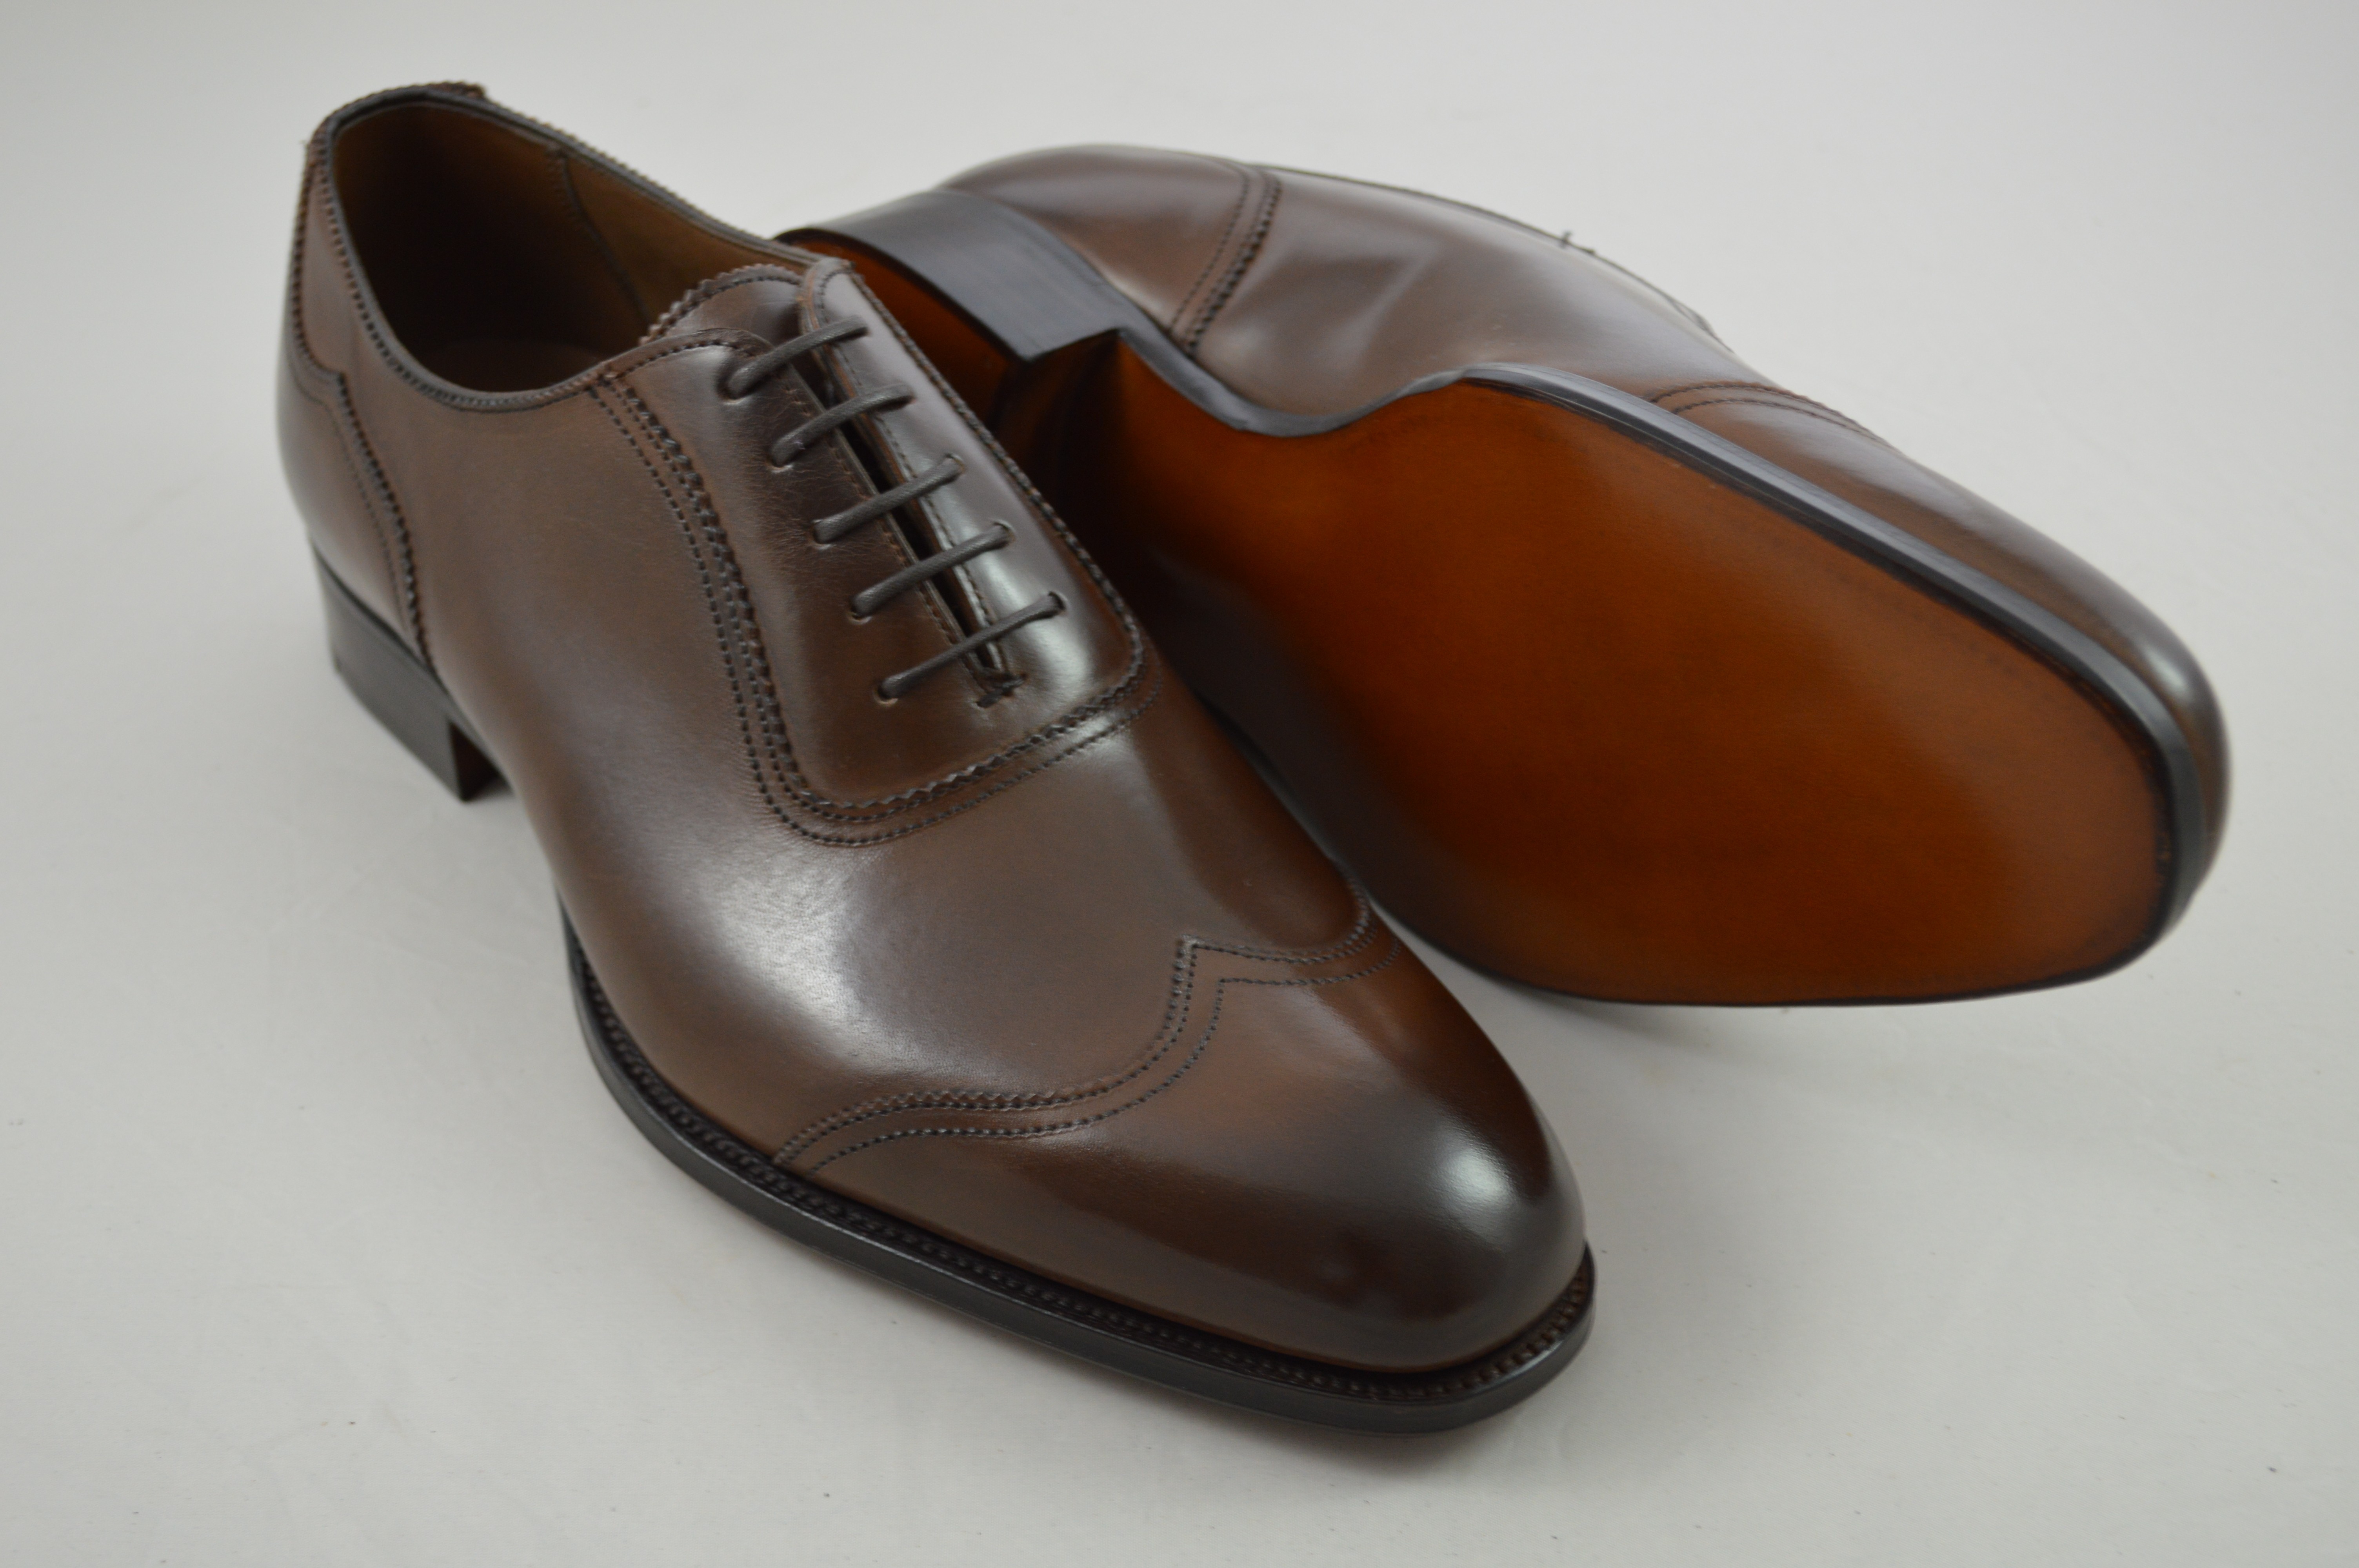 A Fine Pair of Shoes x Alfred Sargent MTO Thread | Page 64 | Styleforum